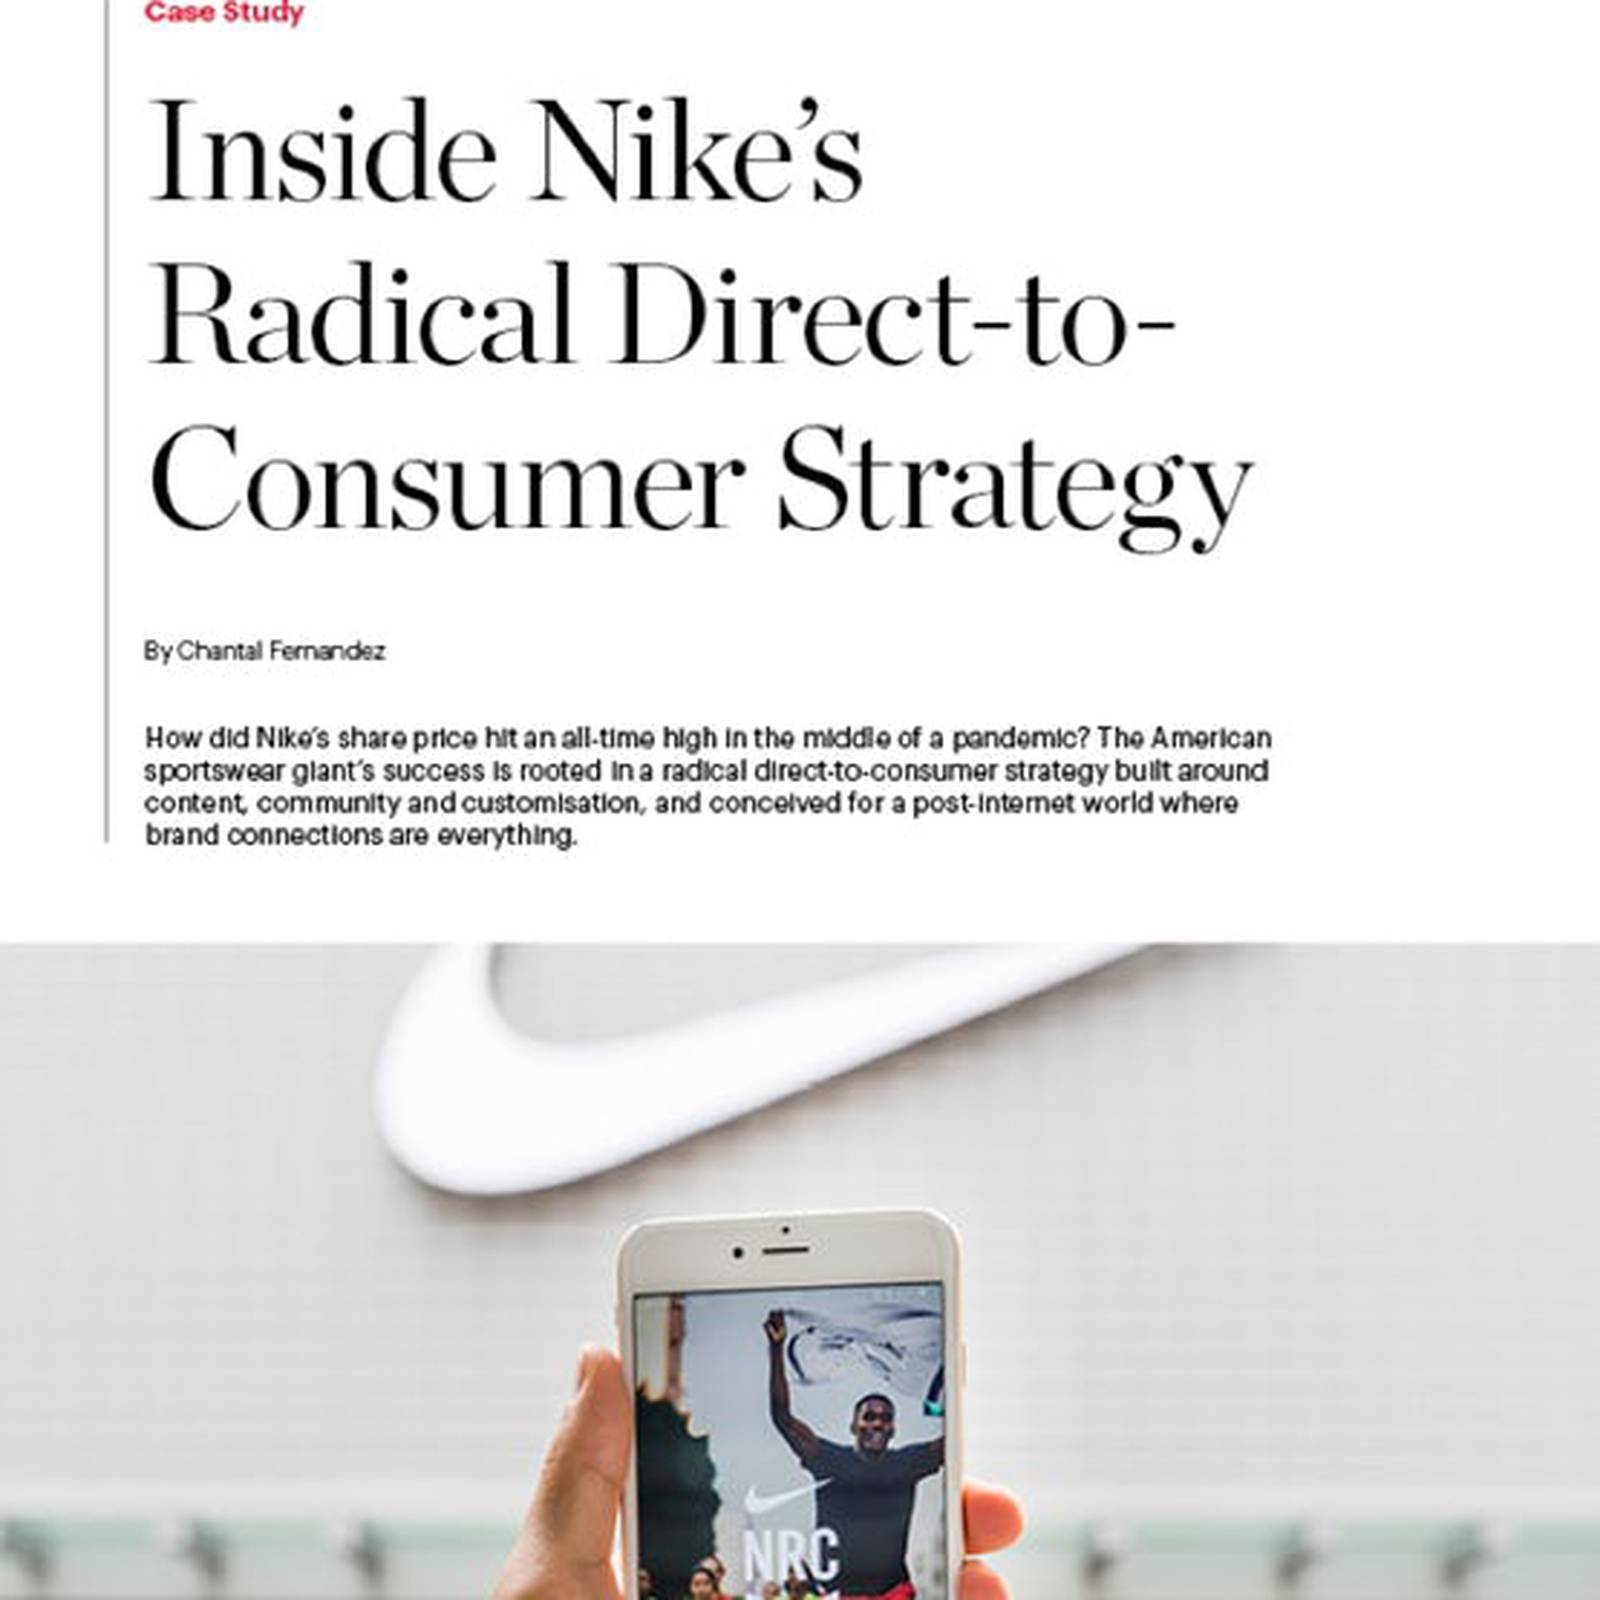 Inside Nike's Strategy — Download the Case Study | BoF